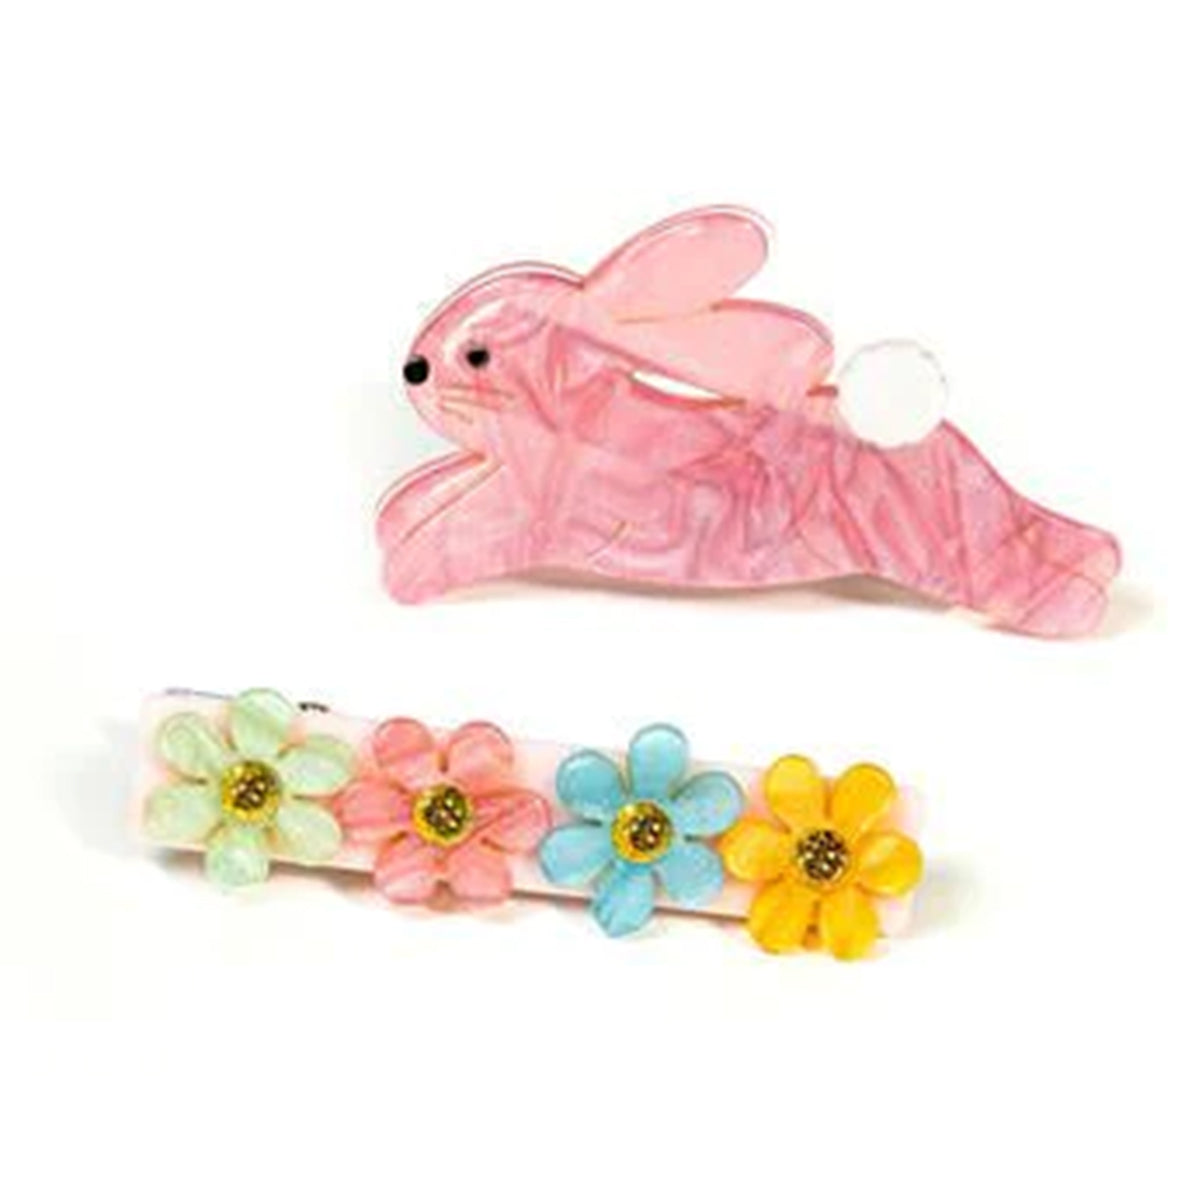 Hop Bunny Easter Pearlized Acrylic Hair Clips Set Lilies & Roses